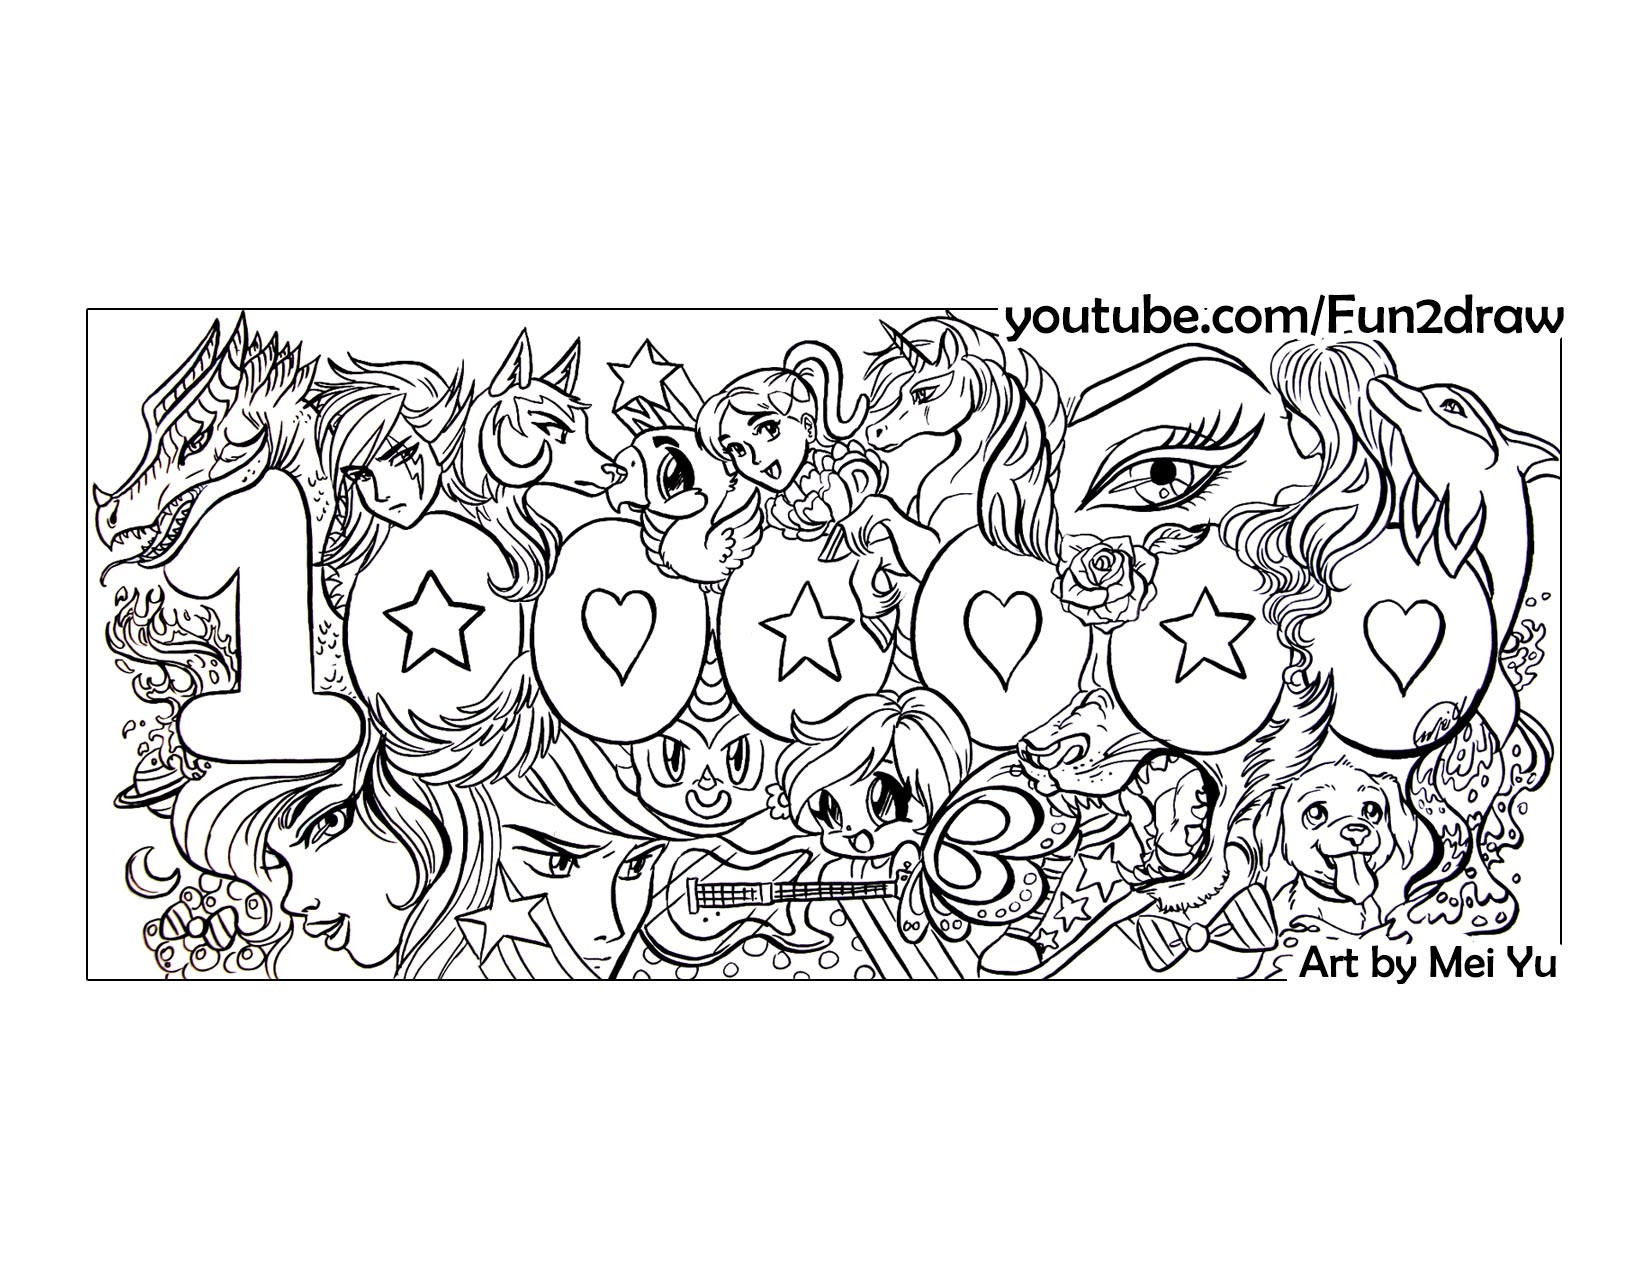 Fun 2 Draw Coloring Pages
 Fun2draw Freebies 1 Million Subscribers on